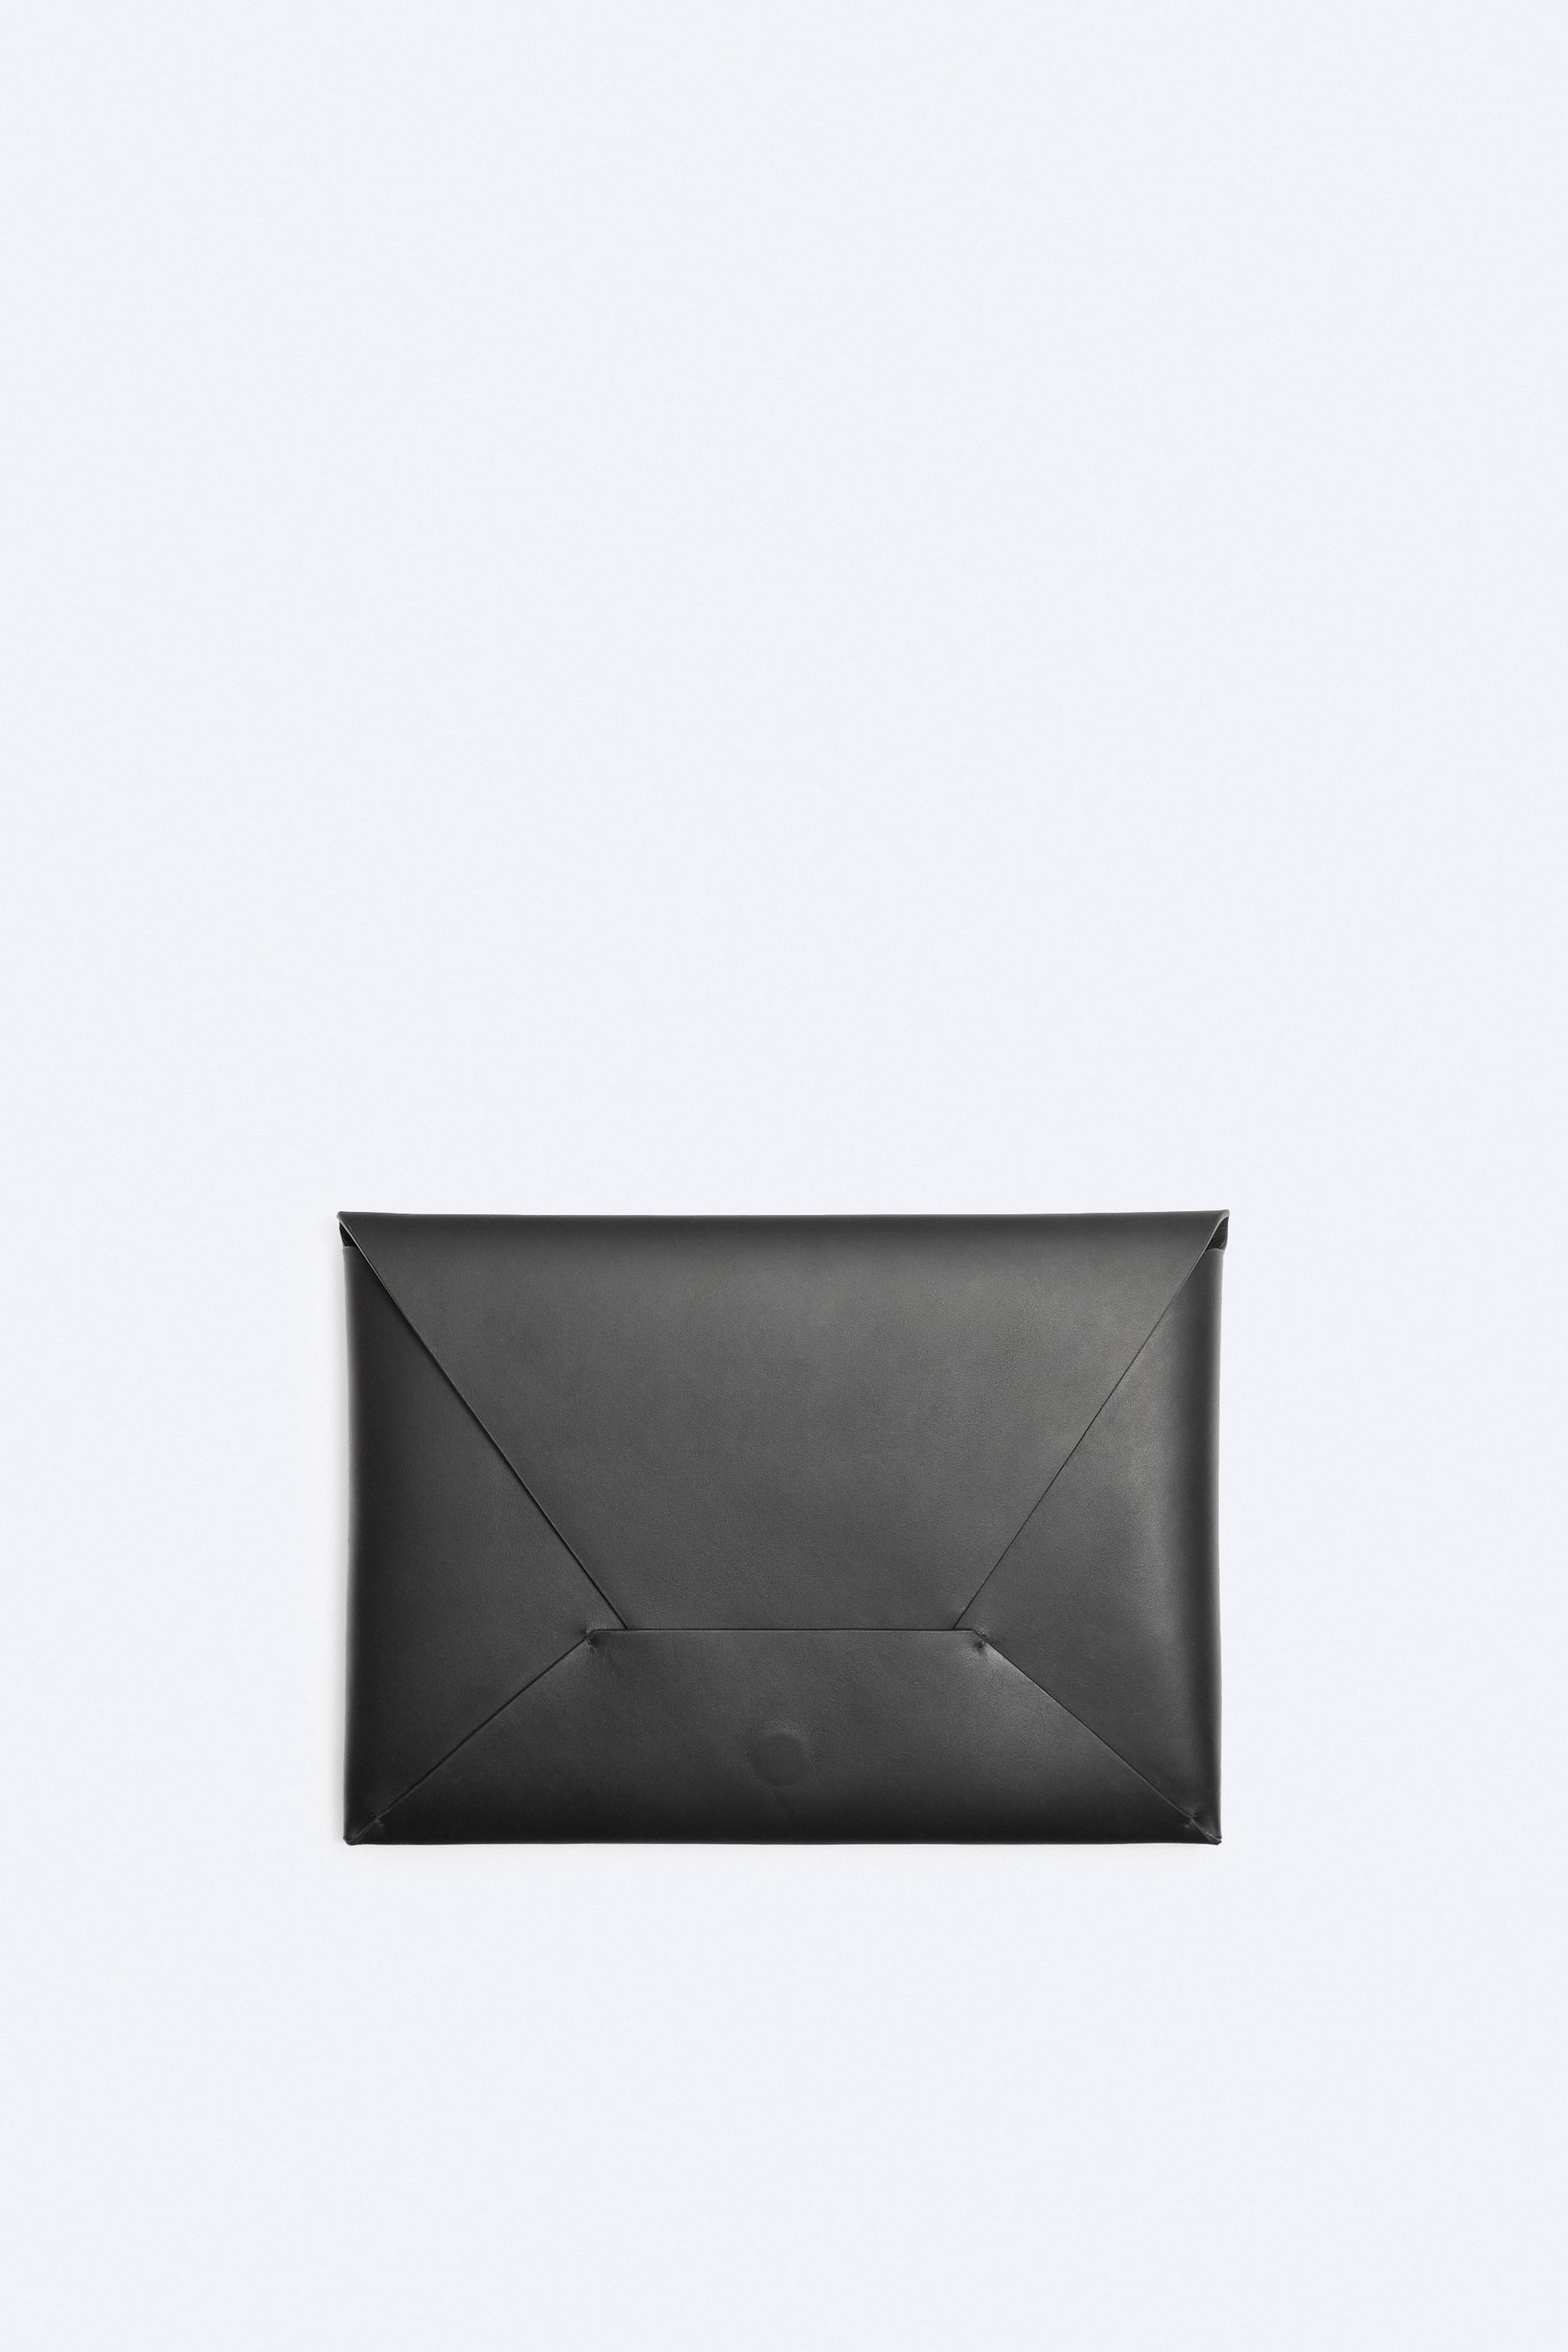 LEATHER CLUTCH